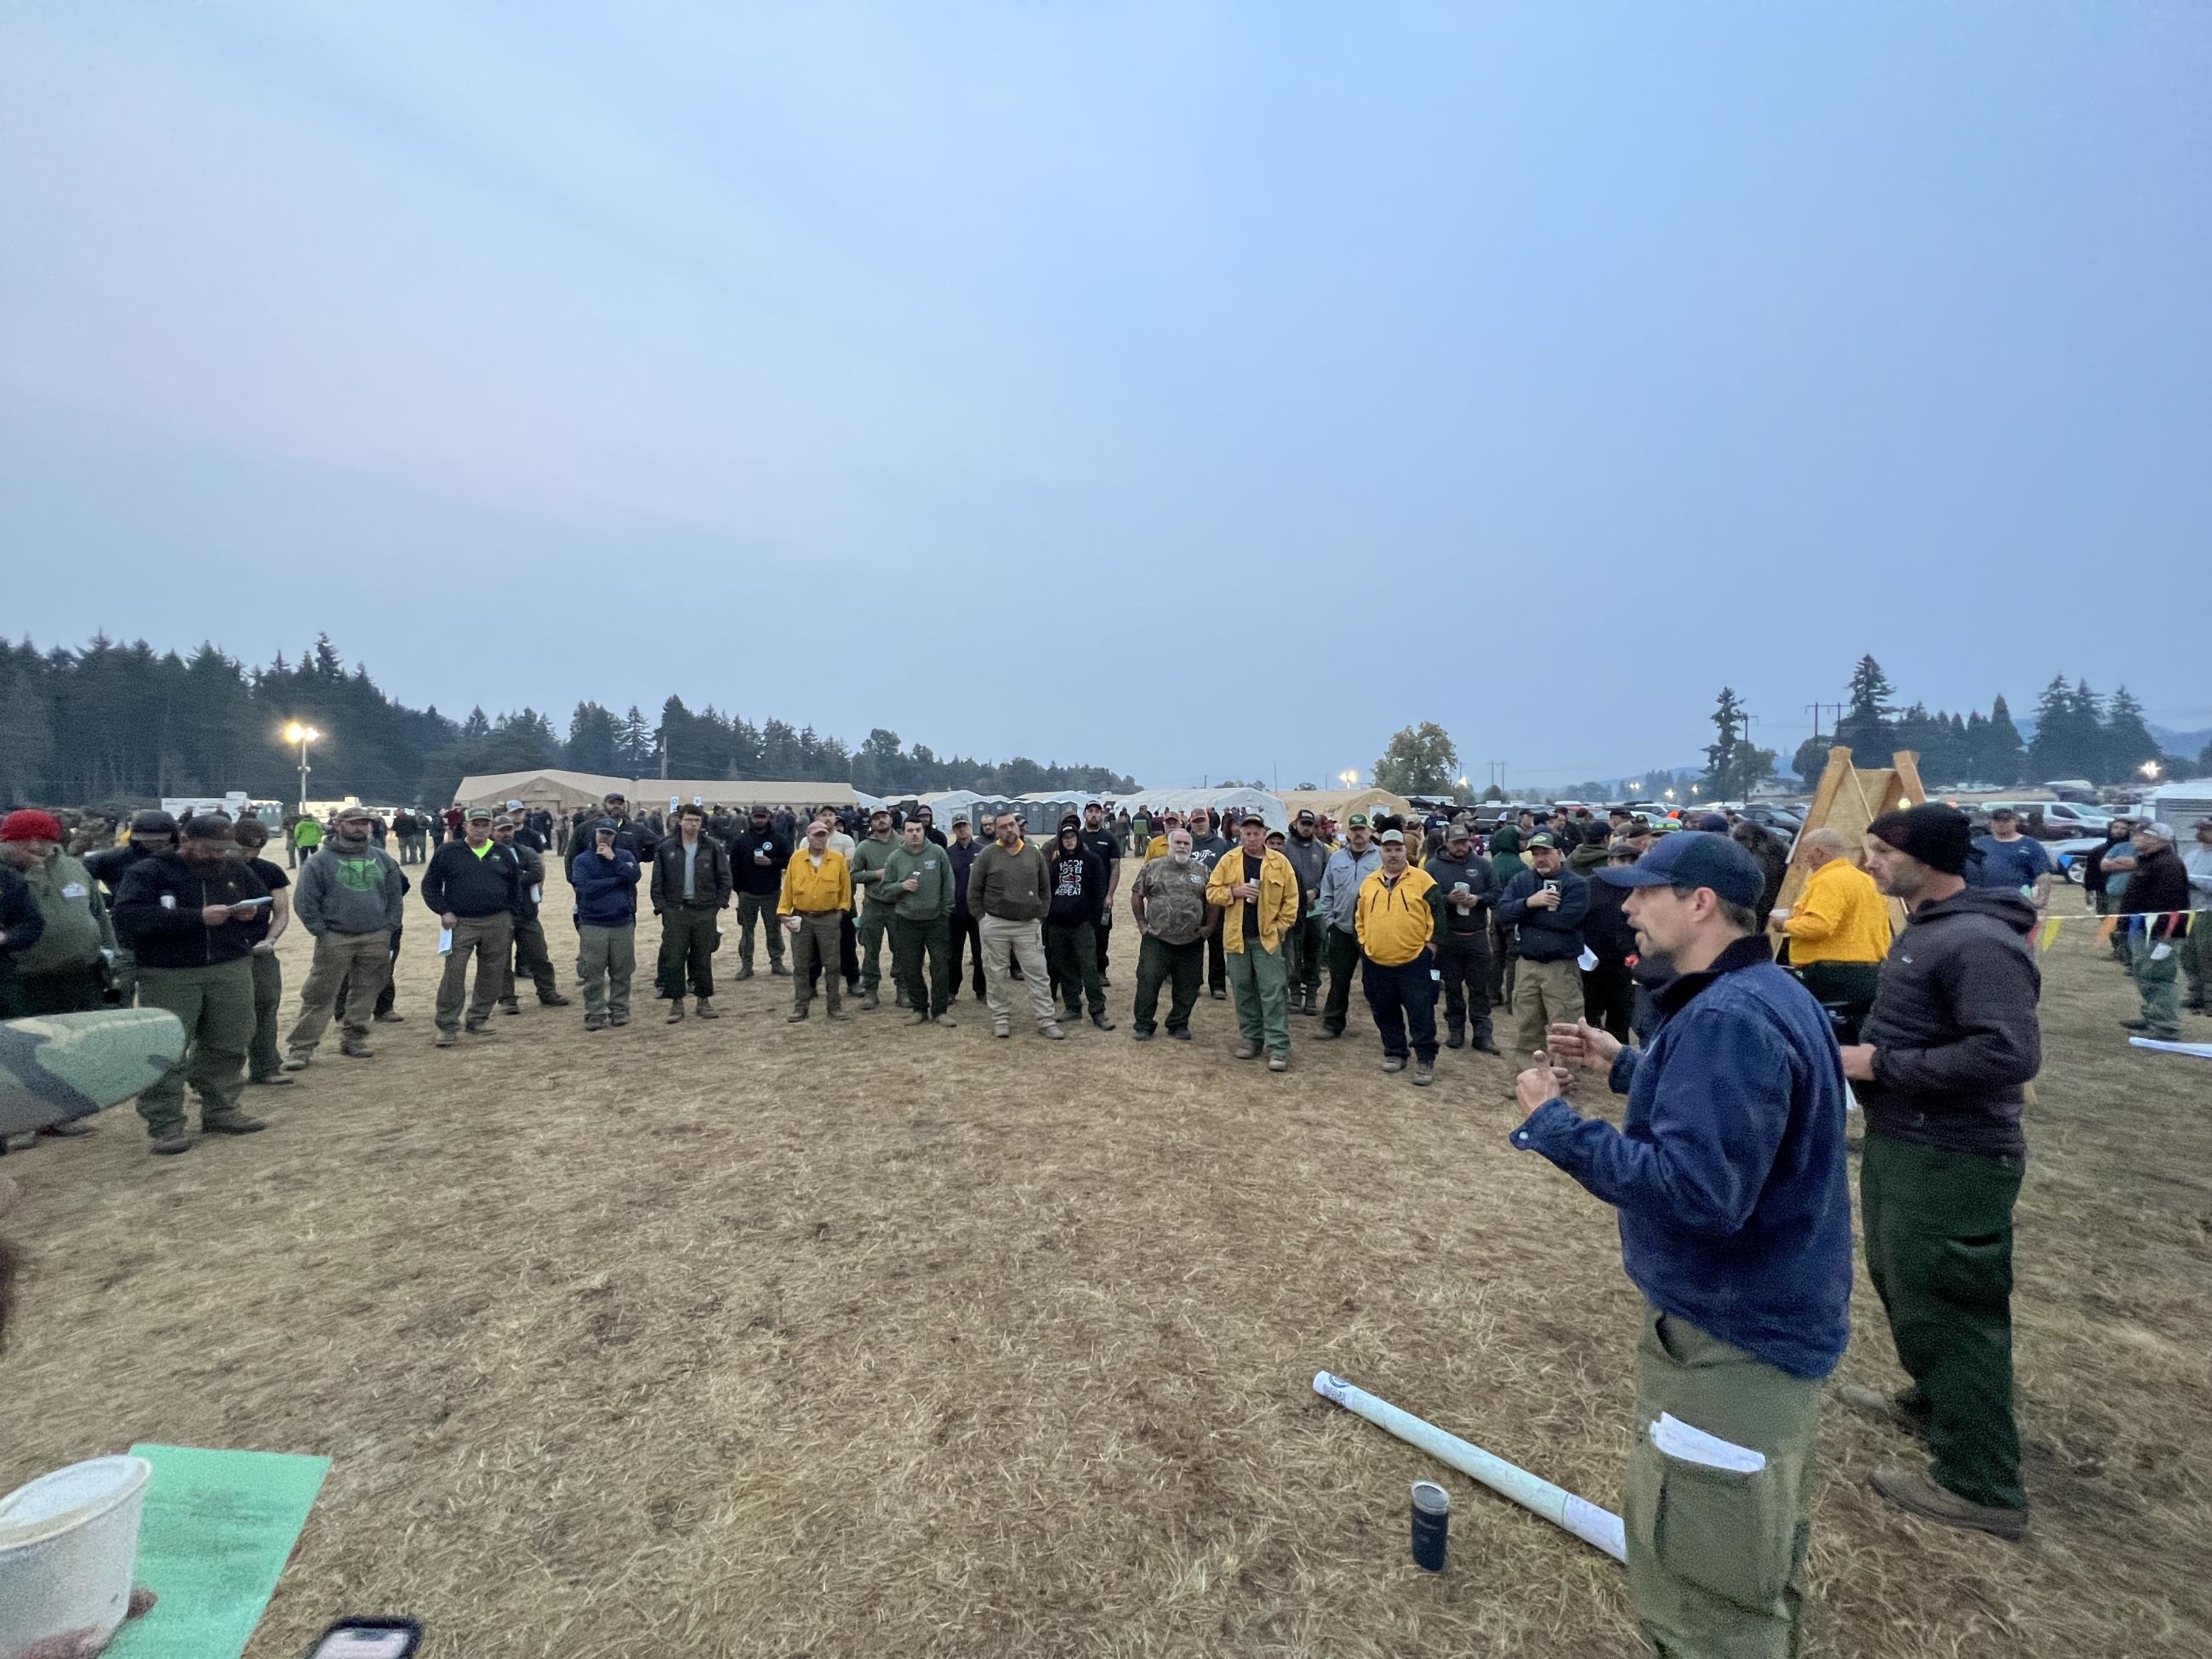 A group of firefighters in a semi-circle conduct a meeting.